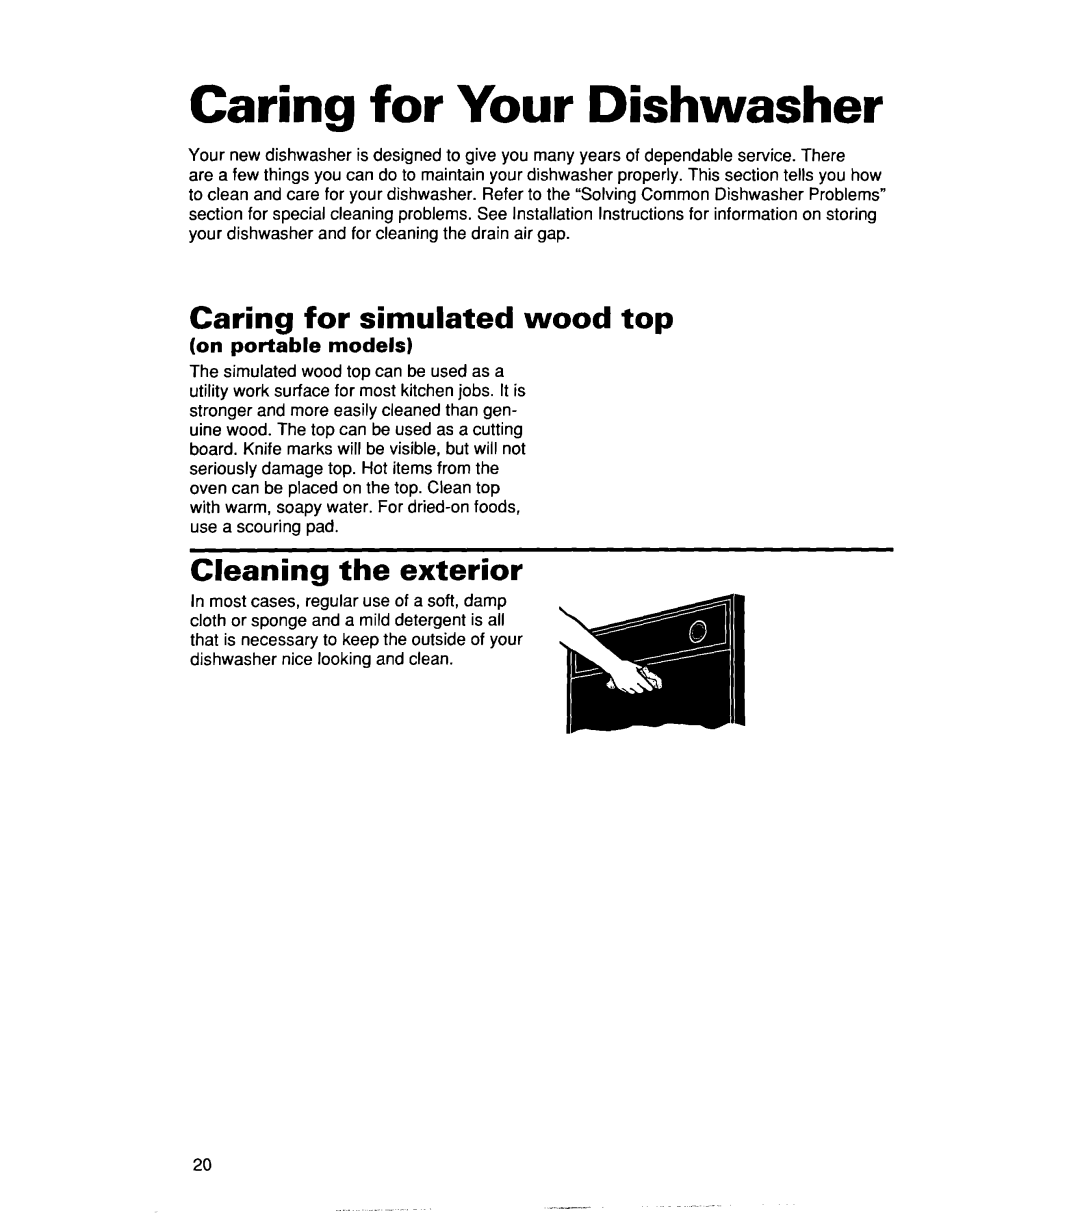 Whirlpool 830, Series 400, 806 warranty Caring for Your Dishwasher, Caring for simulated wood top, on portable models 